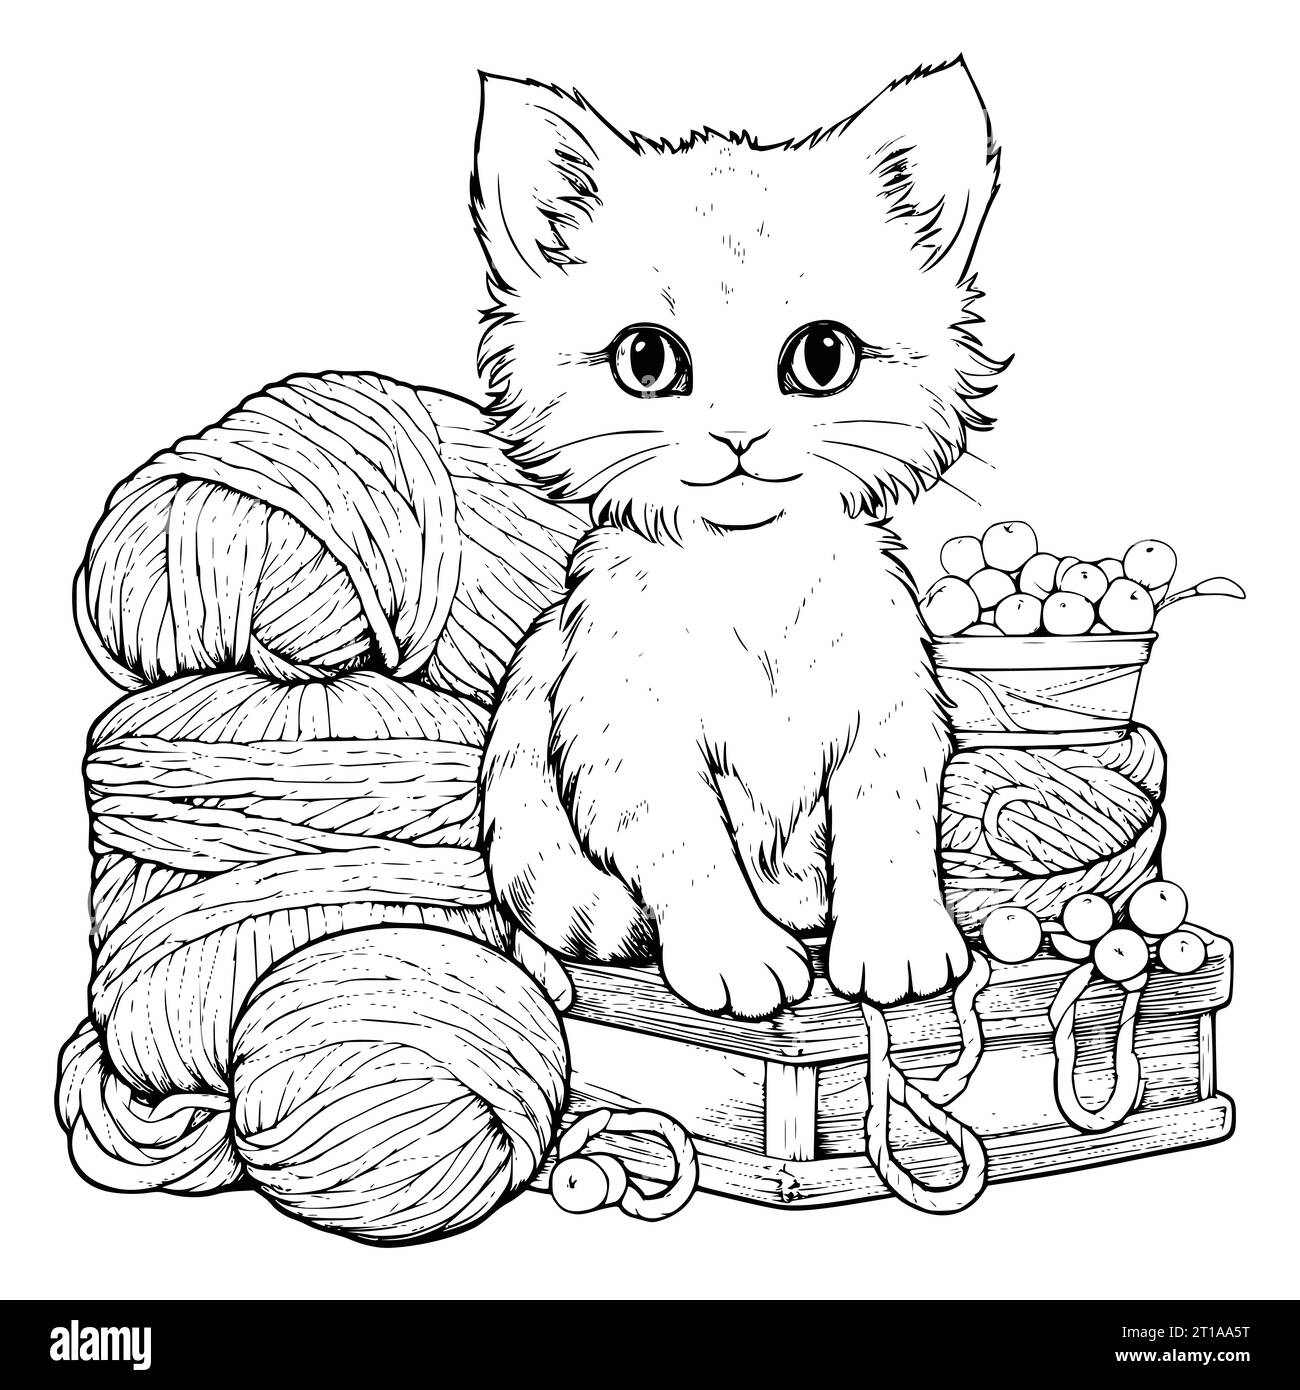 Cat And Yarn Coloring Page For Kids  54545 Stock Vector